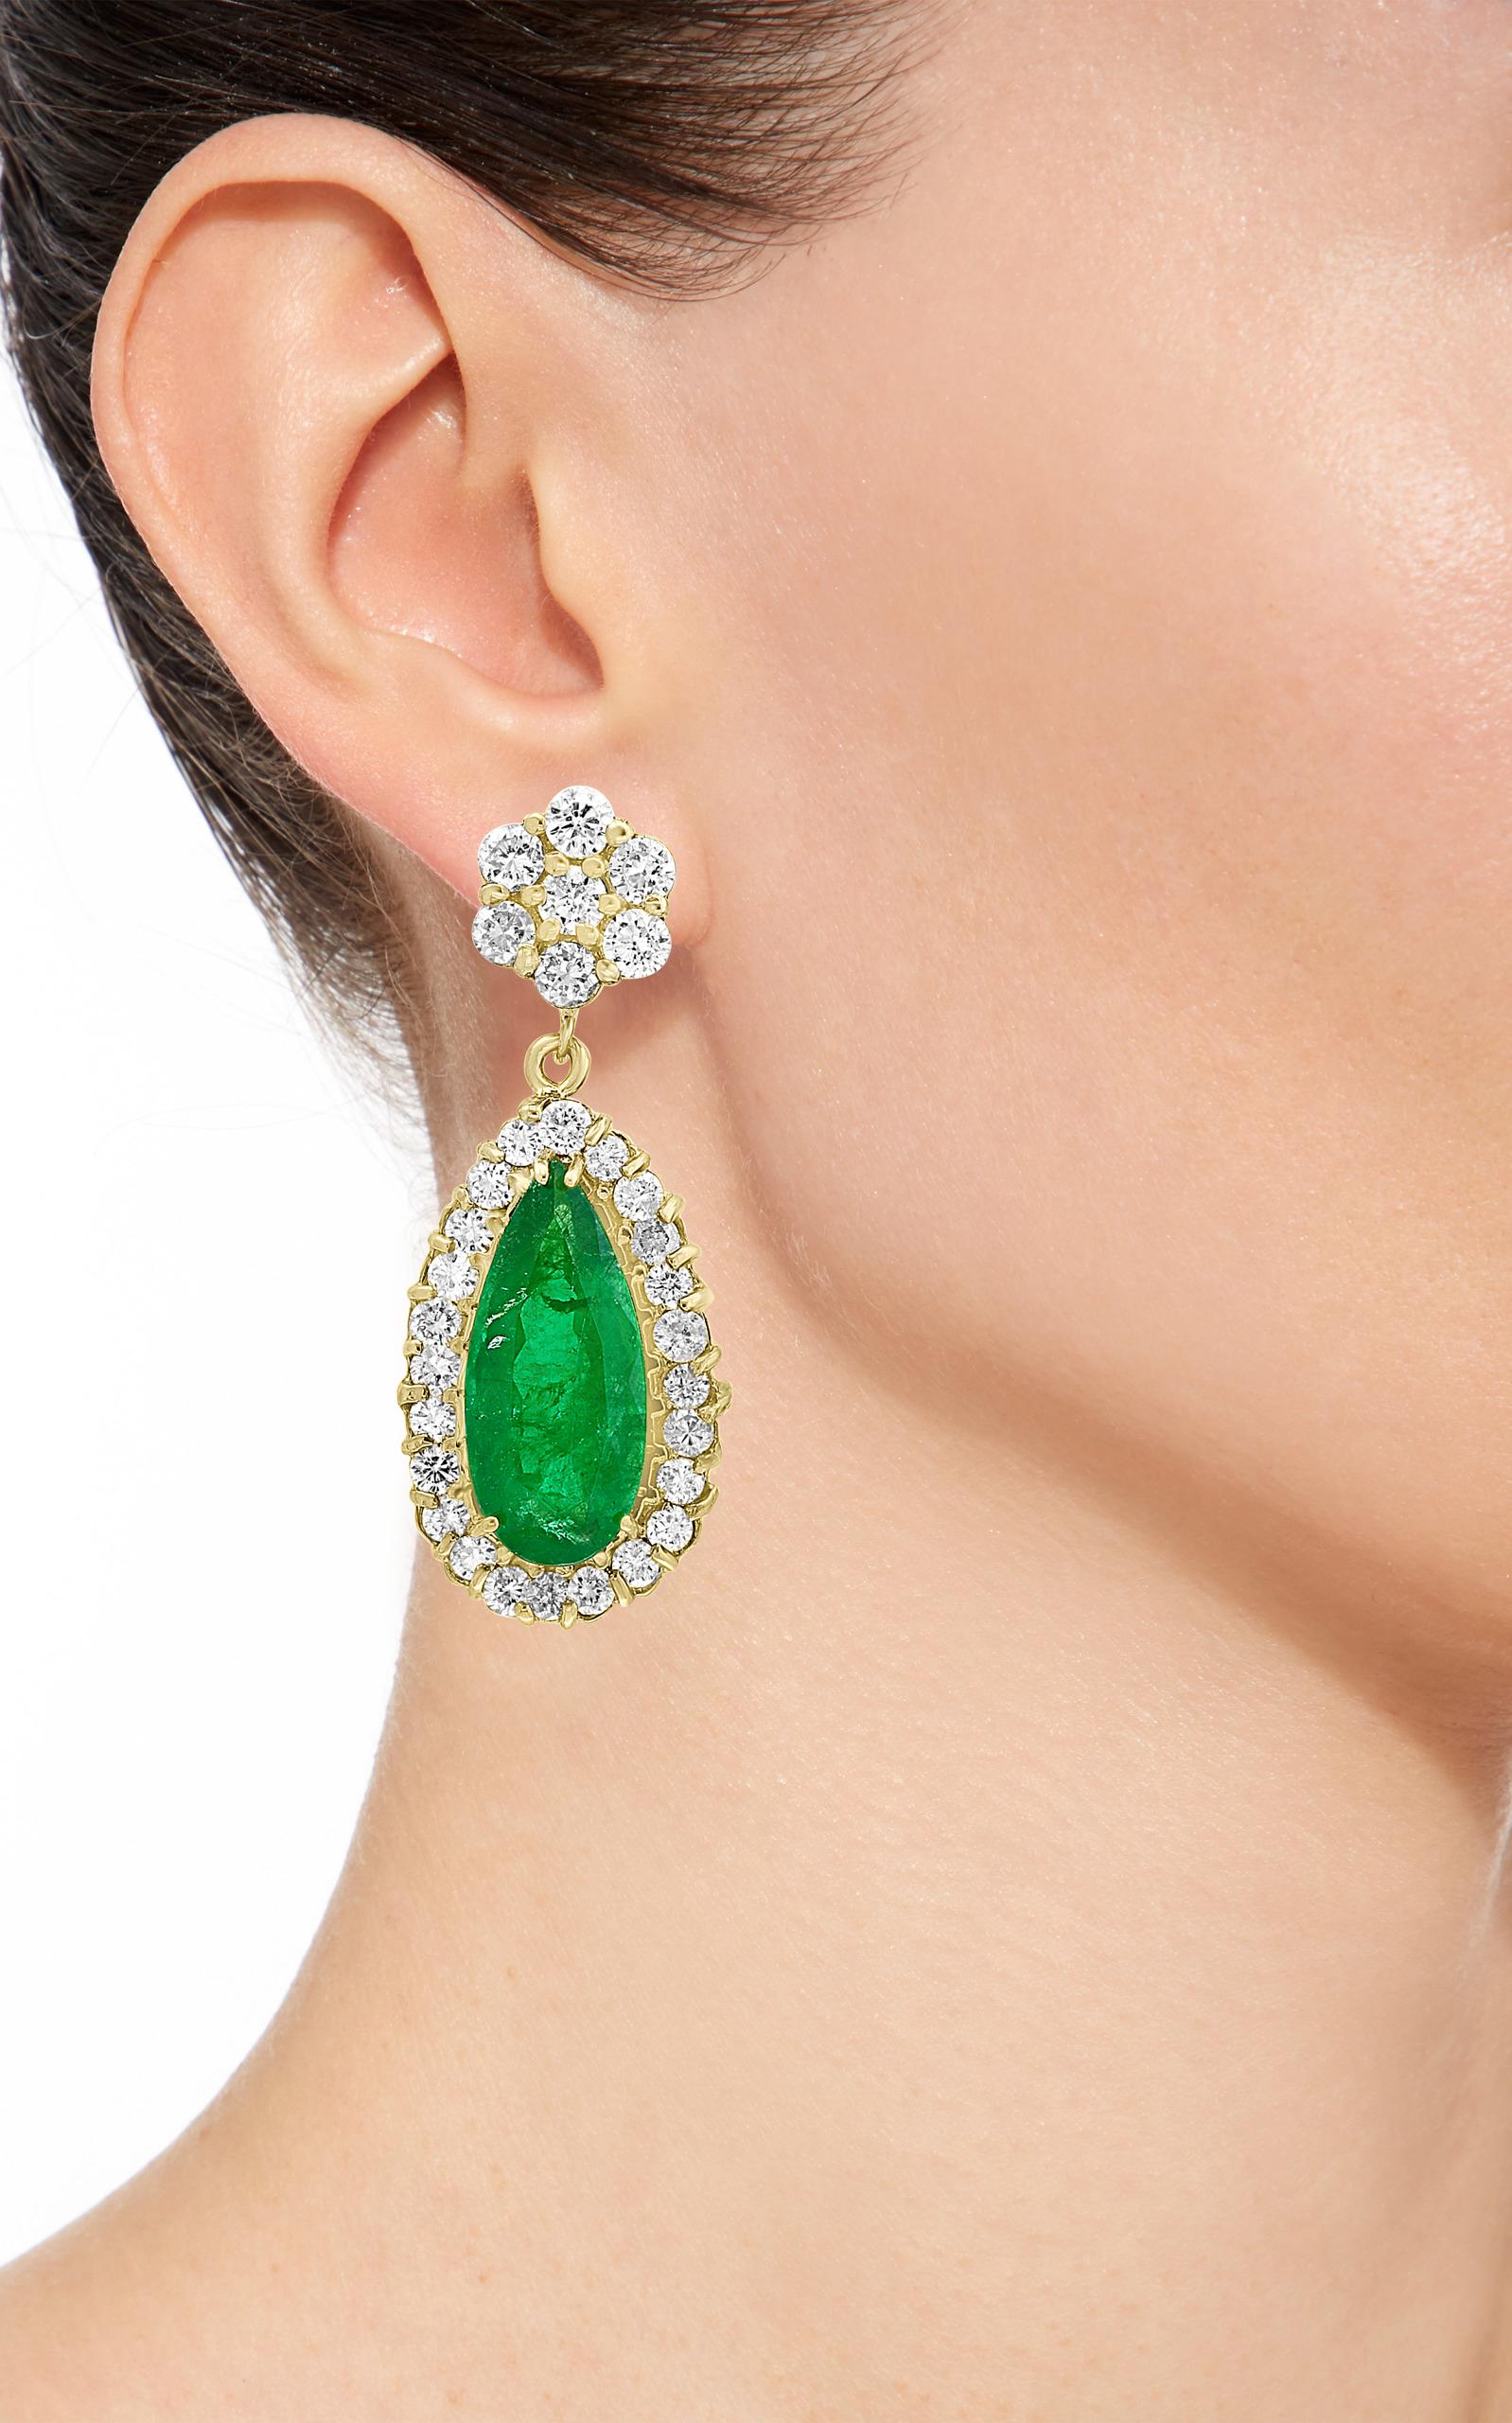 11 Carat Colombian Pear Shape Emerald Diamond Hanging /Drop Earrings 14Kt Gold In Excellent Condition In New York, NY